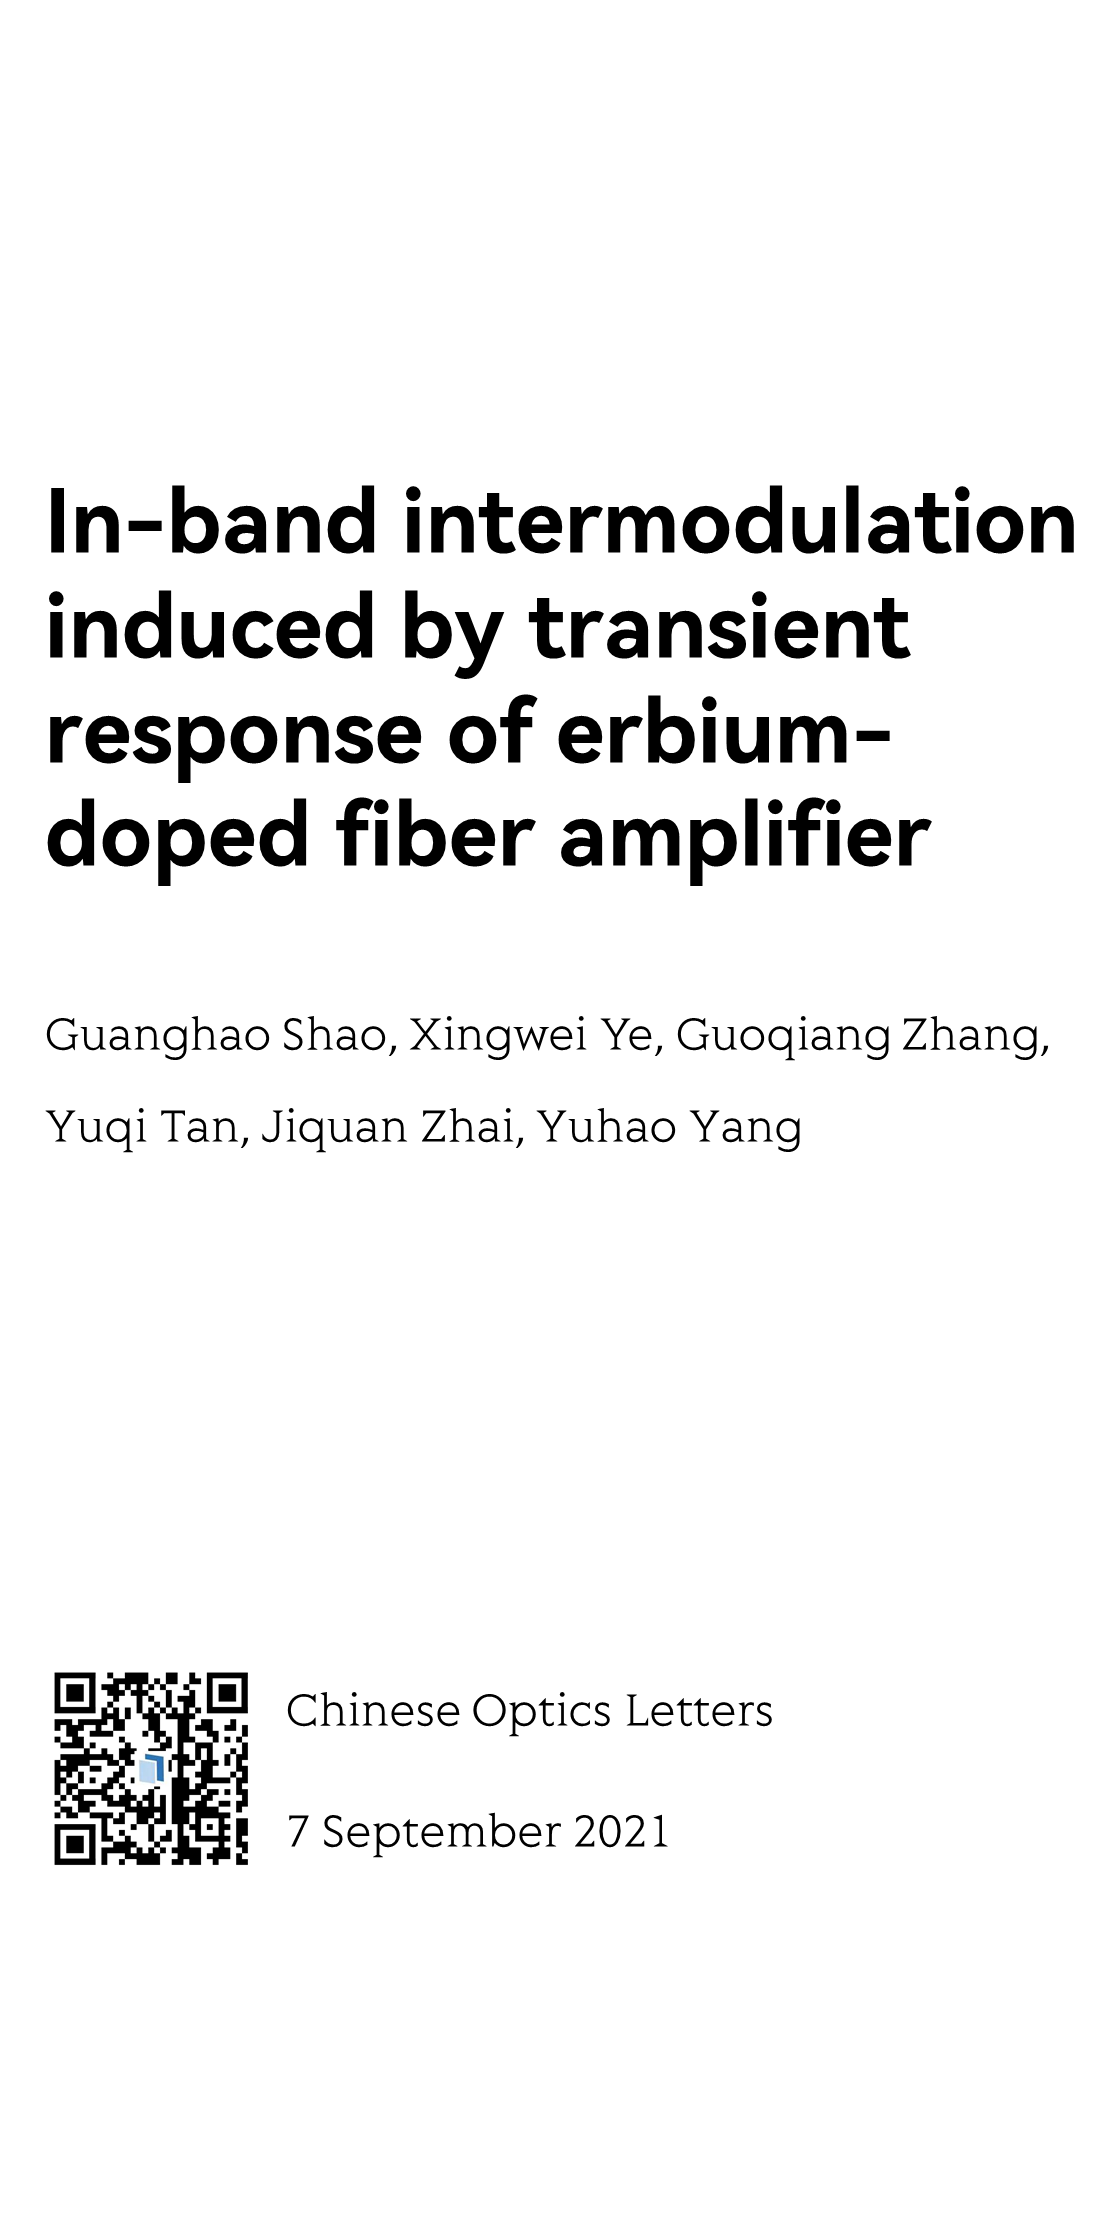 In-band intermodulation induced by transient response of erbium-doped fiber amplifier_1